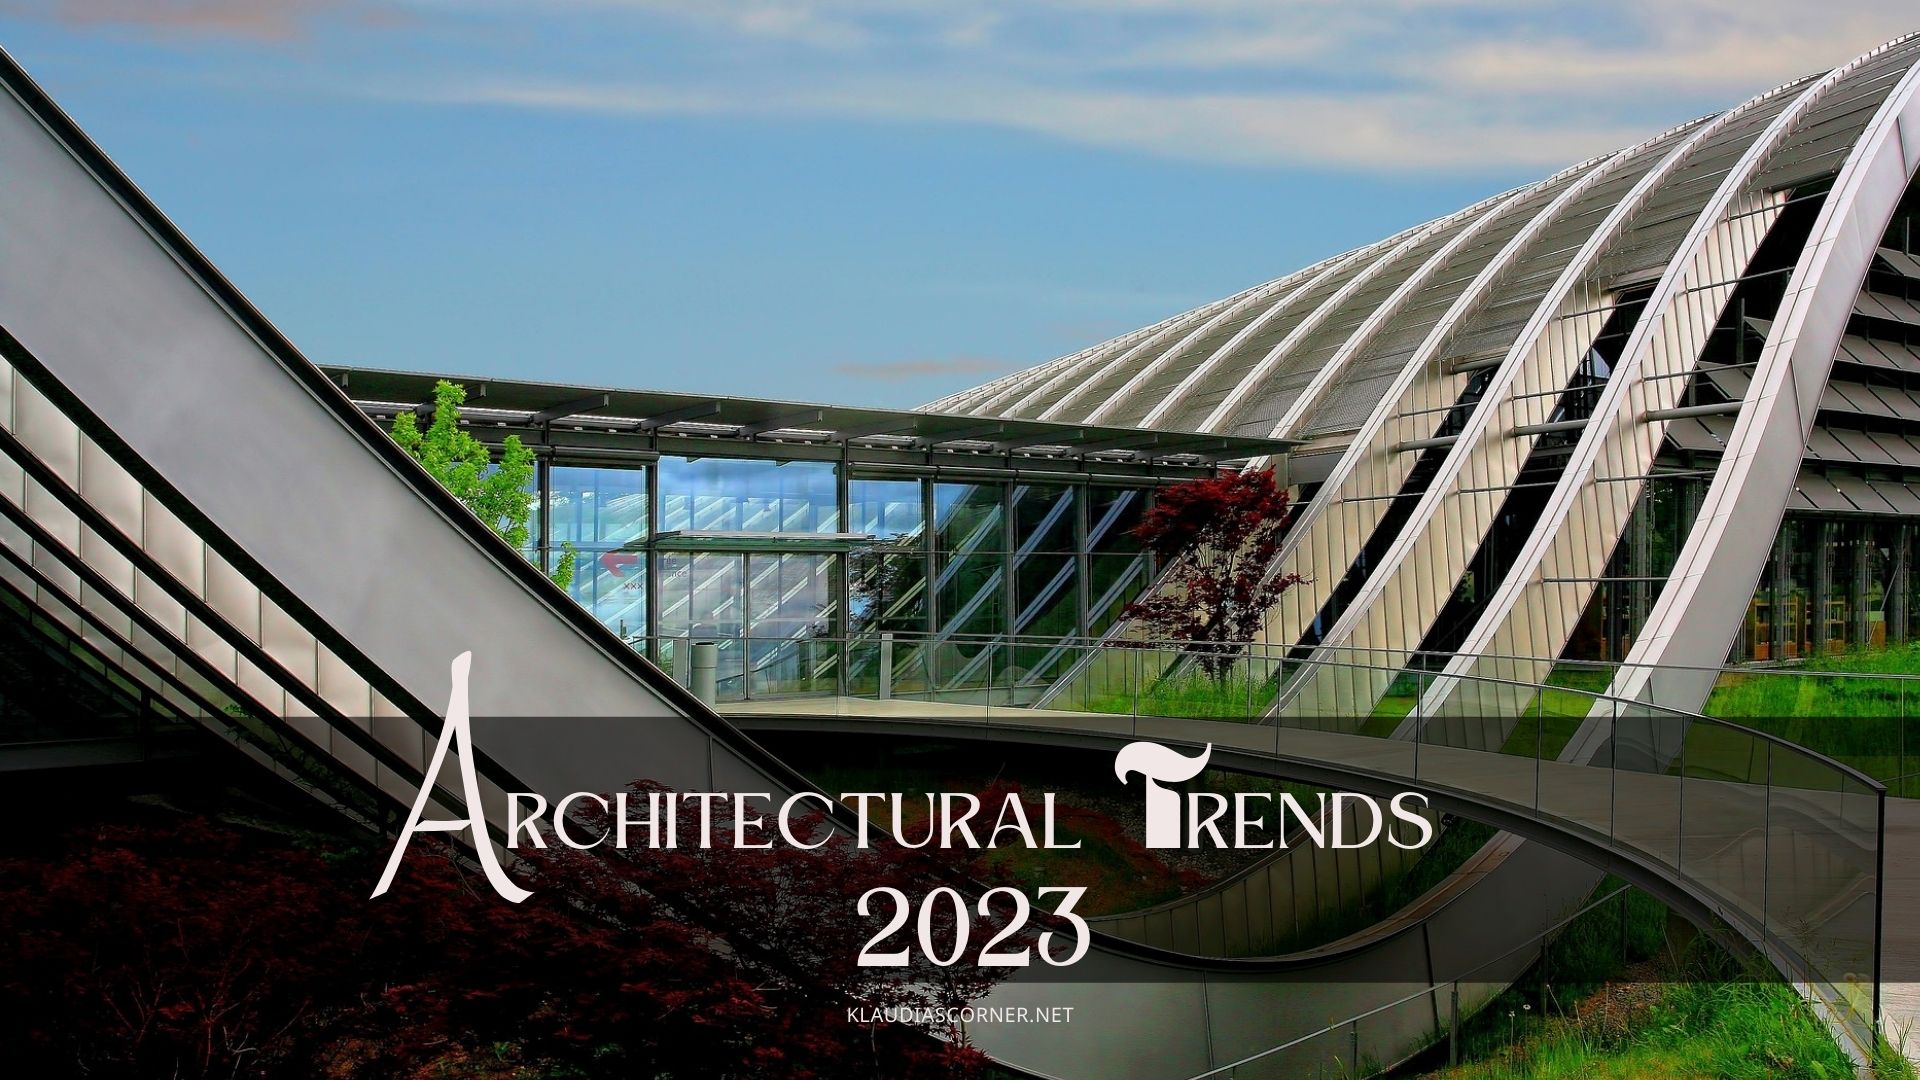 Architectural Trends 2023 